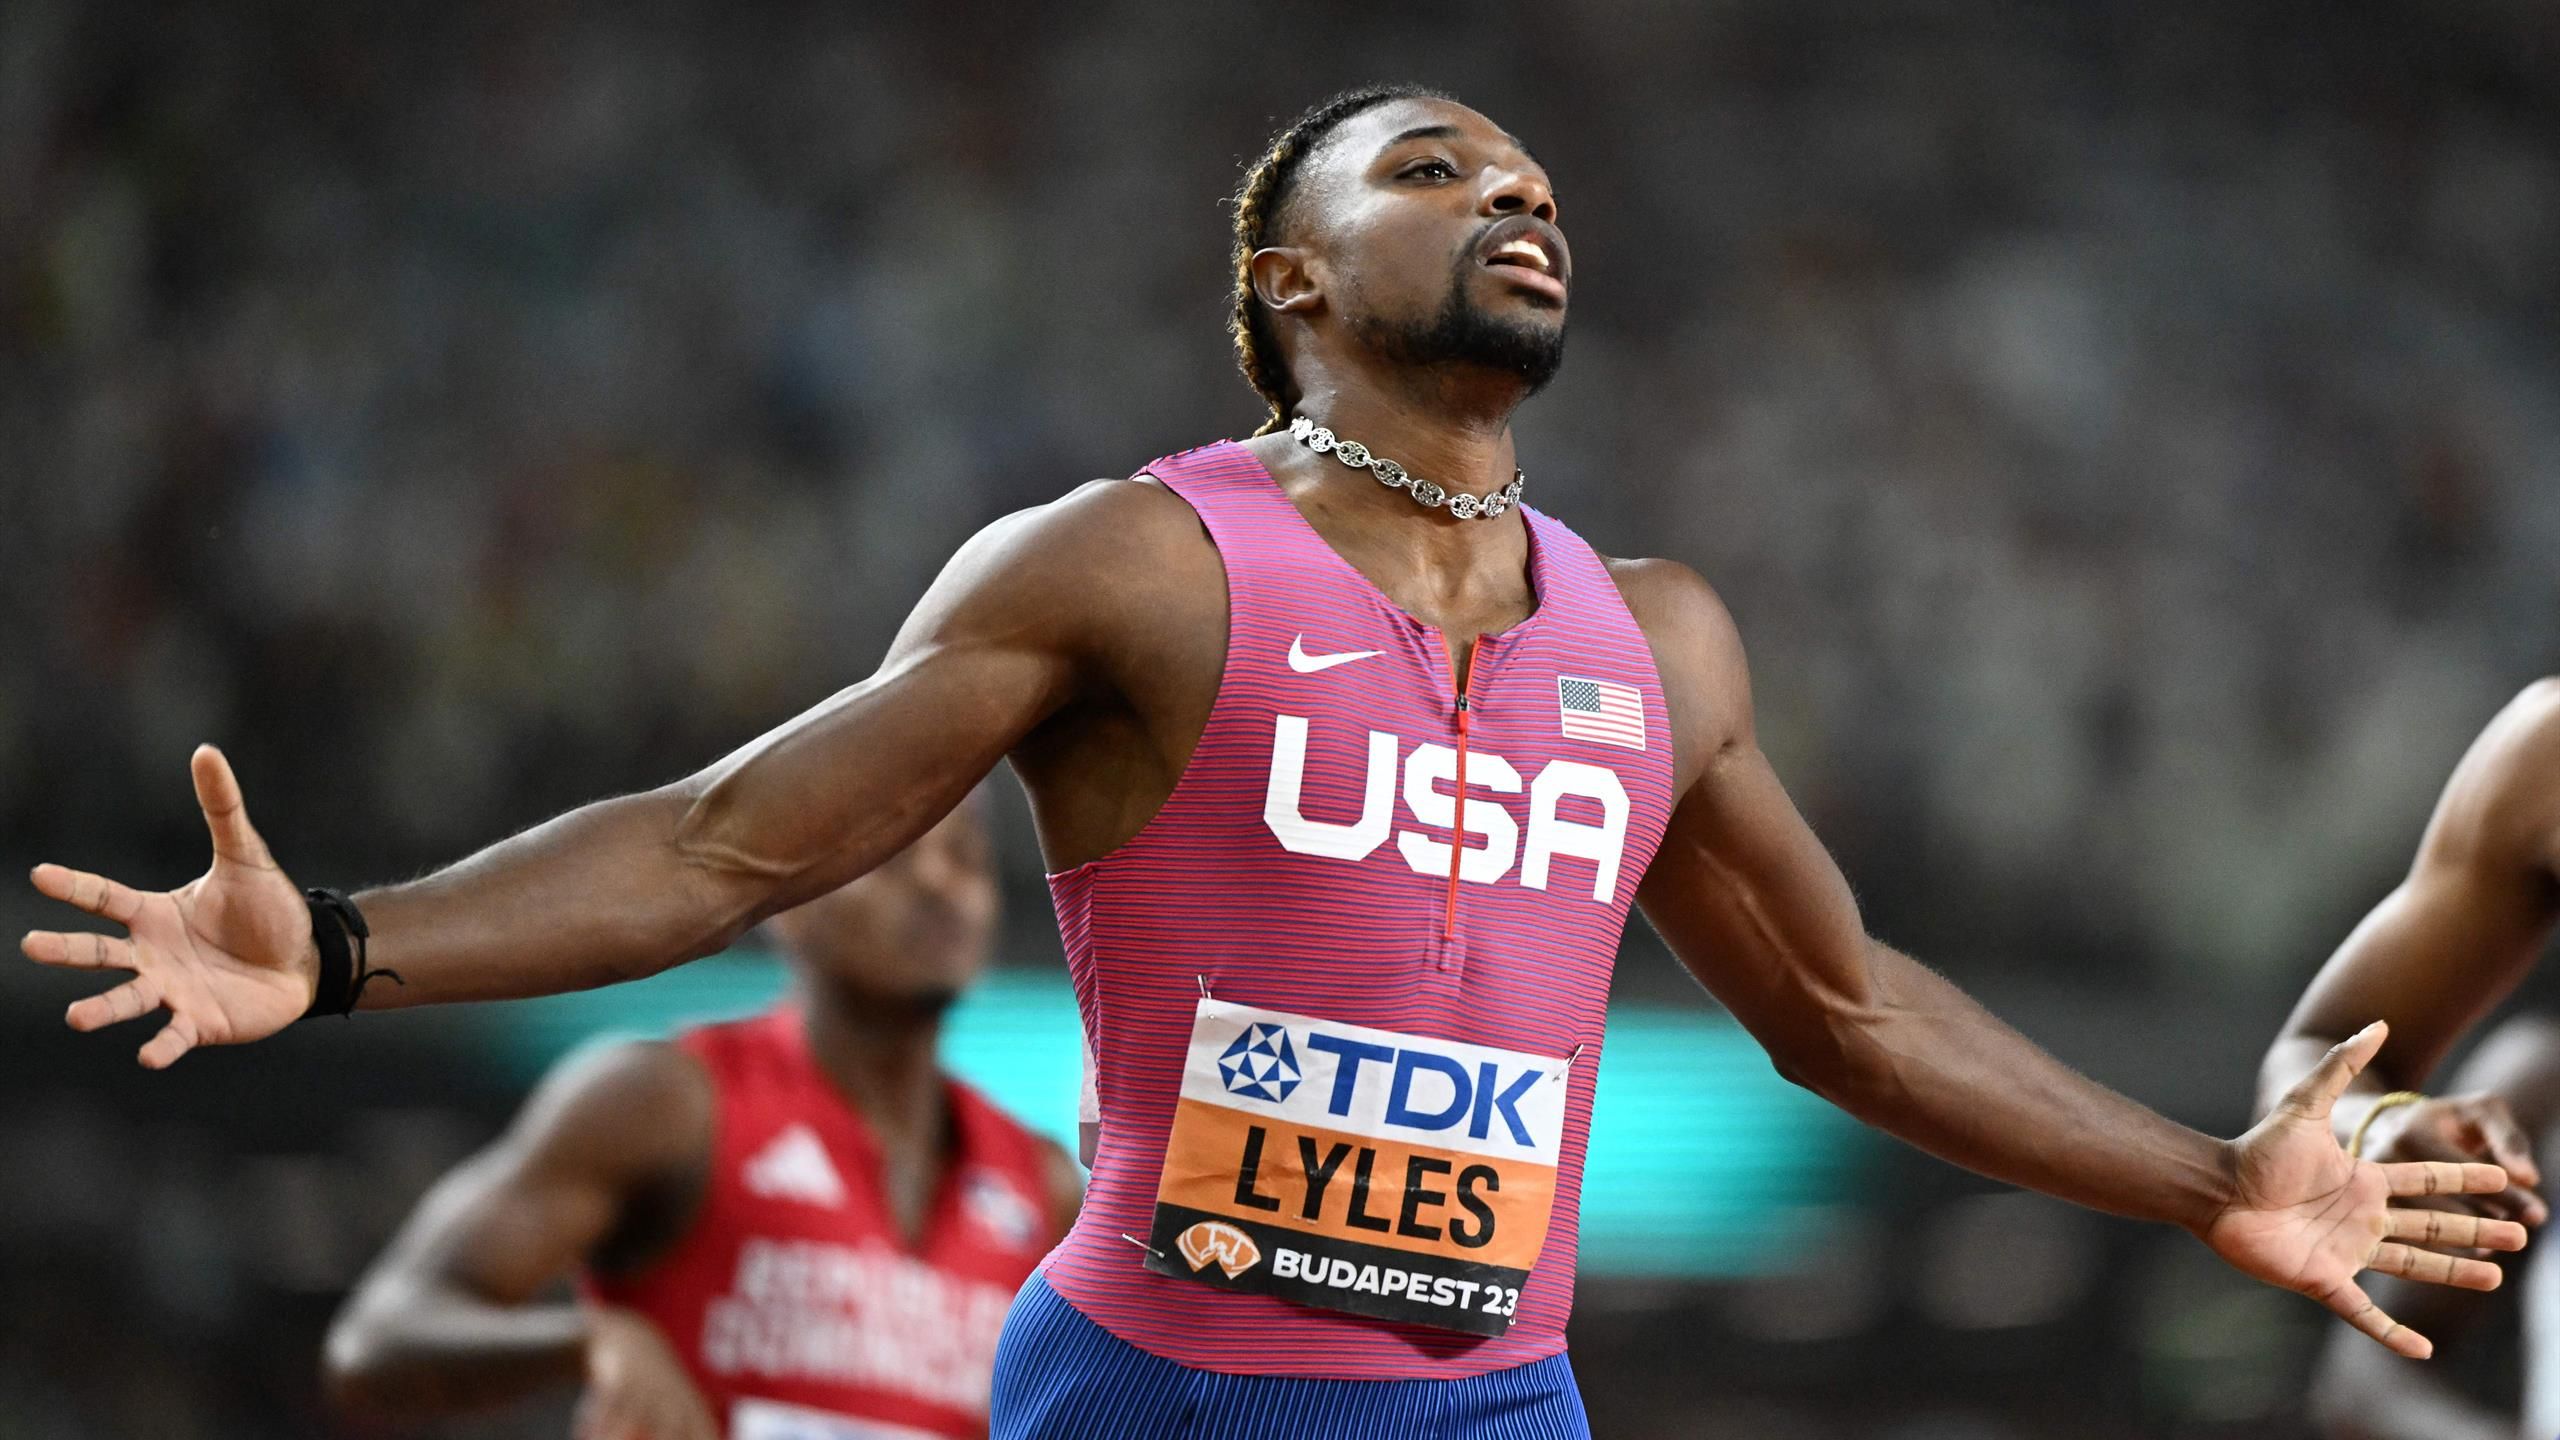 World Athletics Championships 2023 as it happened - Noah Lyles lands sprint double as Zharnel Hughes fourth